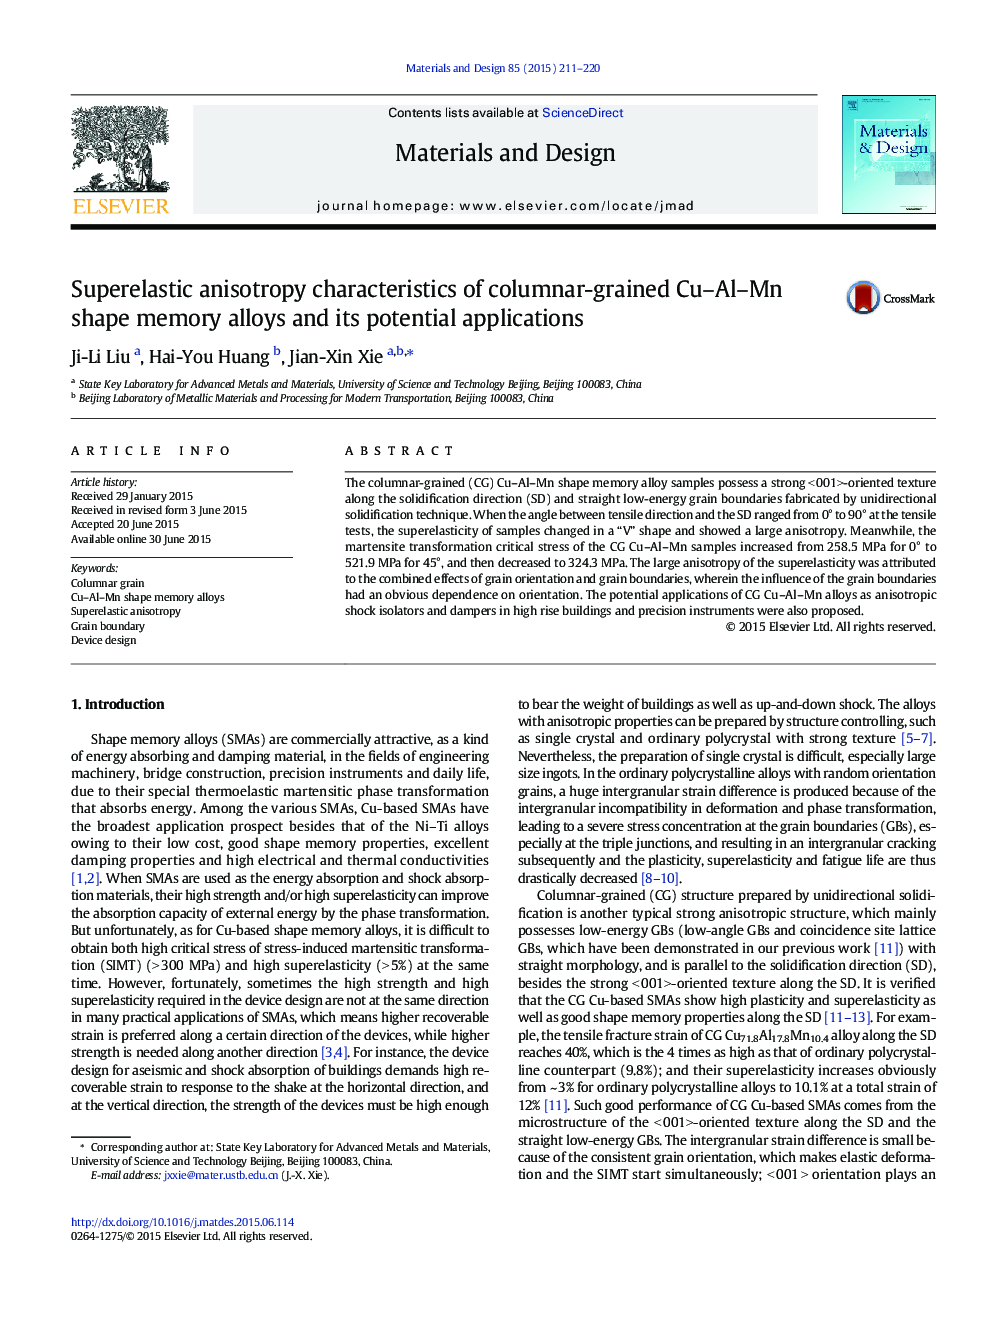 Superelastic anisotropy characteristics of columnar-grained Cu–Al–Mn shape memory alloys and its potential applications